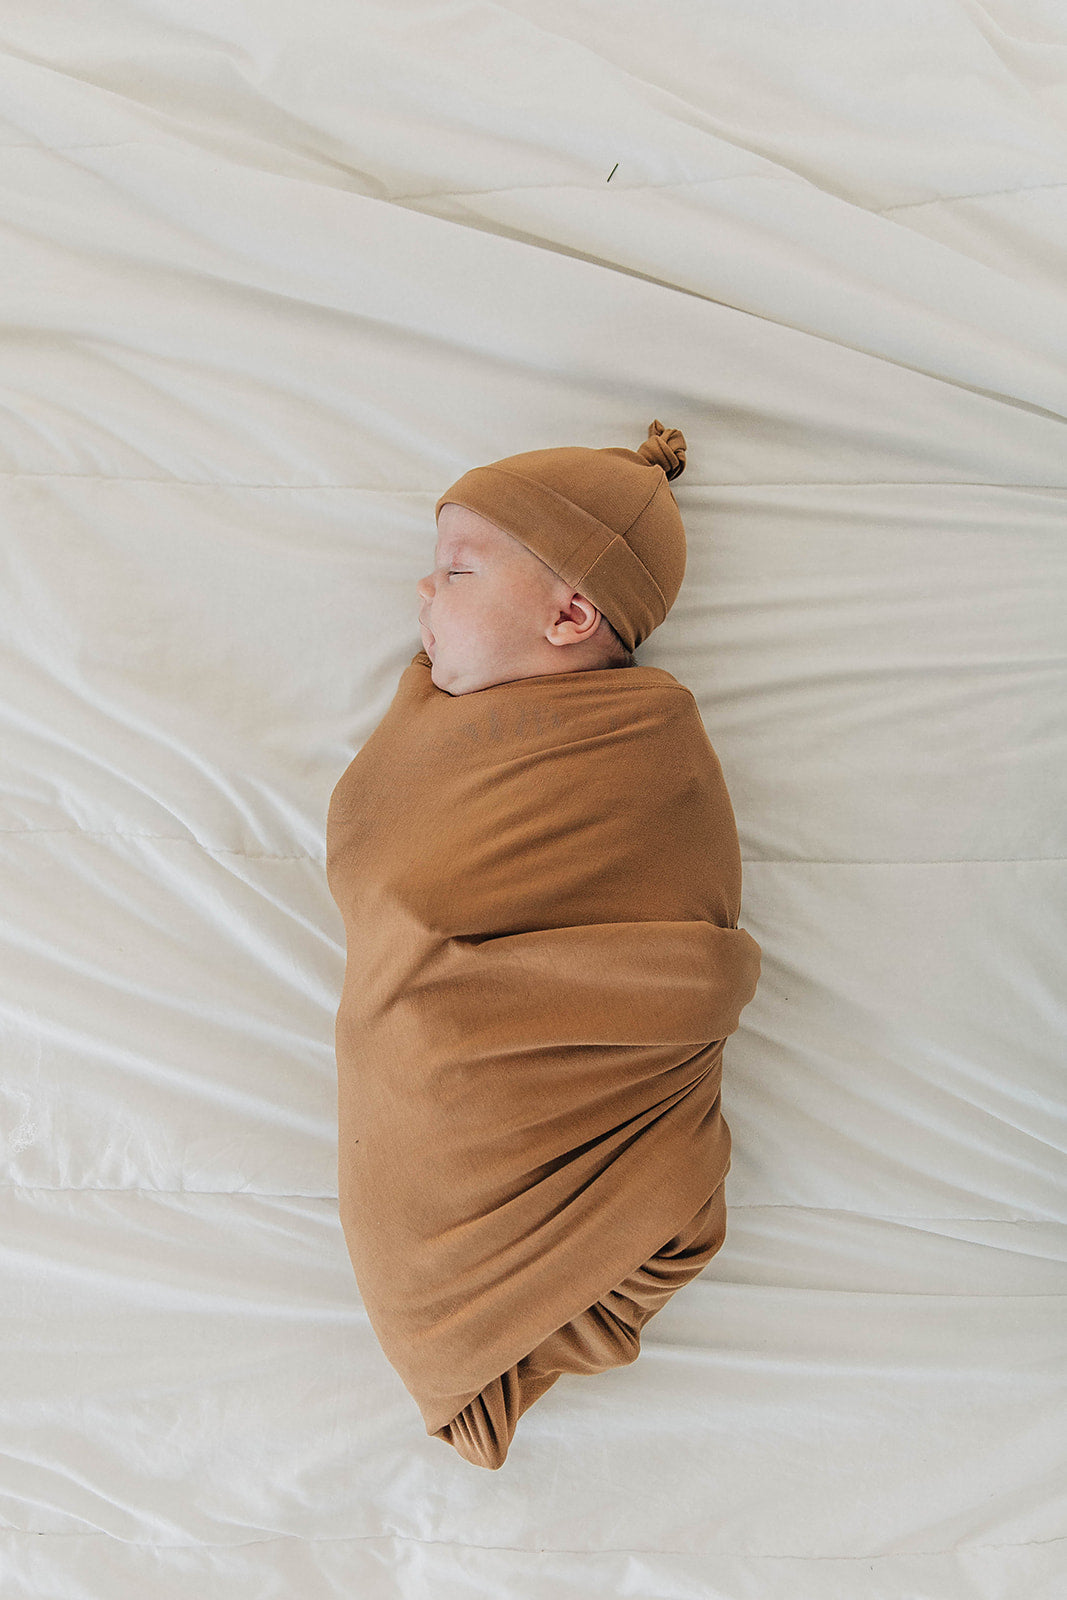 Mebie Baby Mustard Stretch Swaddle. Mebie Baby Bamboo Stretch Swaddle. Gender Neutral for take home outfits and swaddling newborns. 